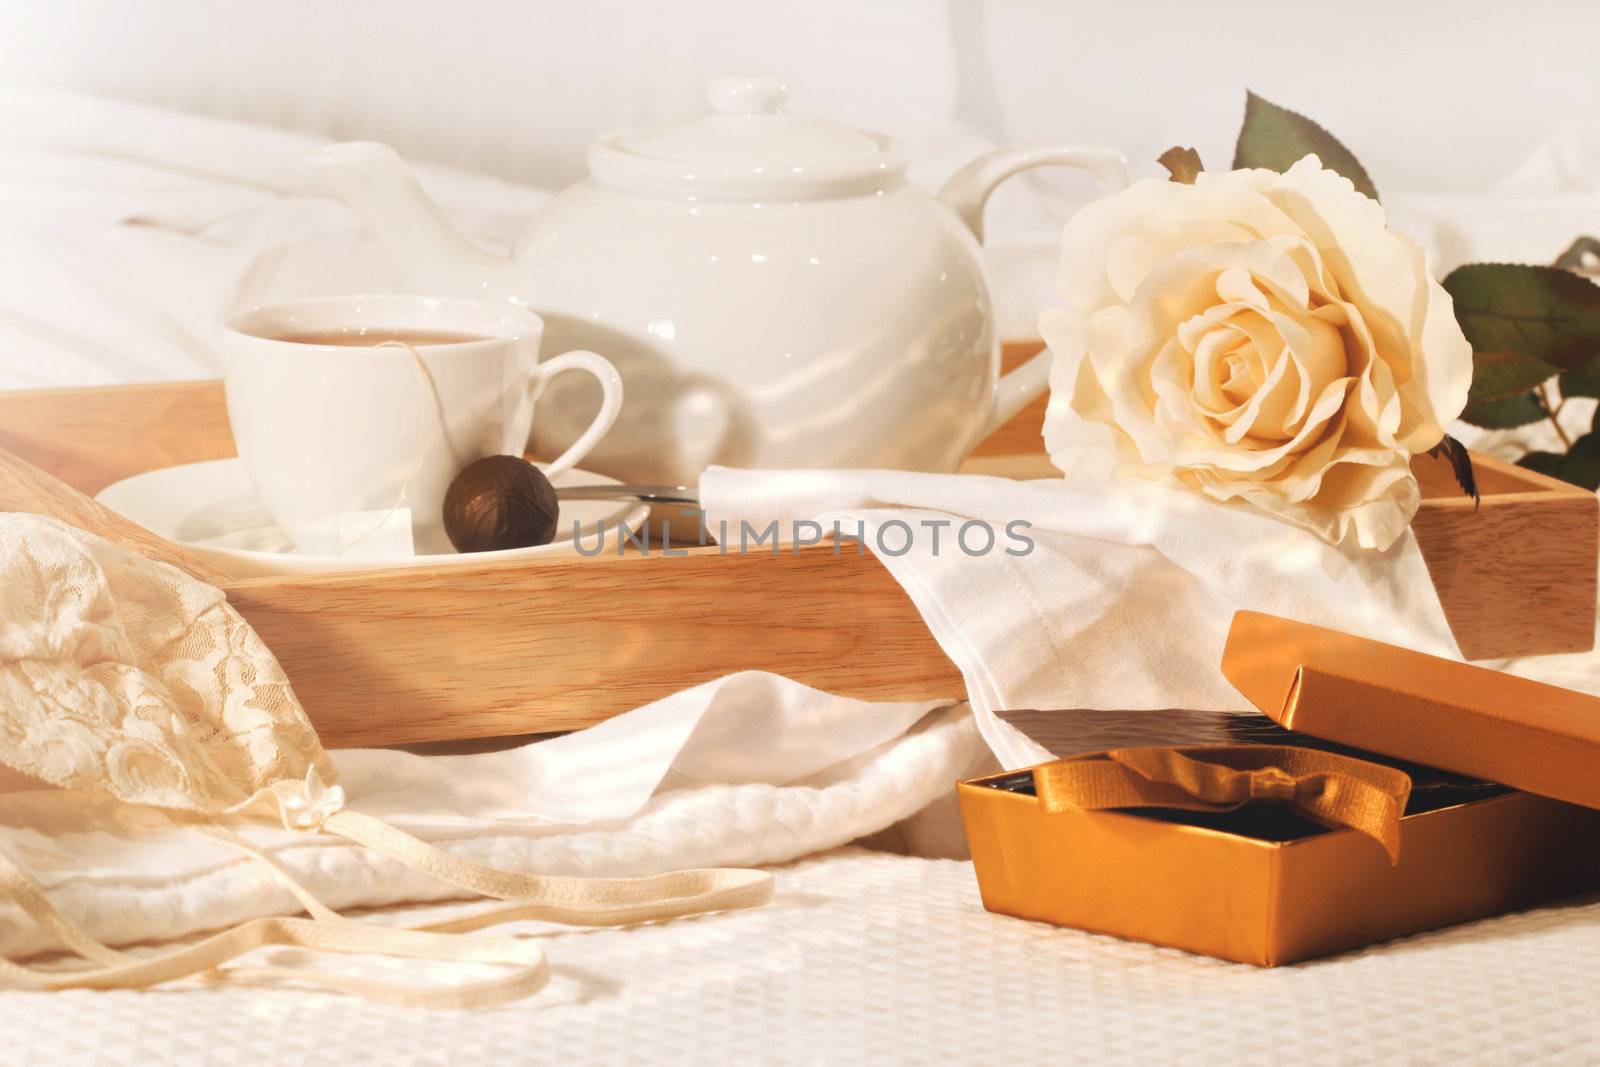 Relaxing in bed with tea and chocolates by Sandralise